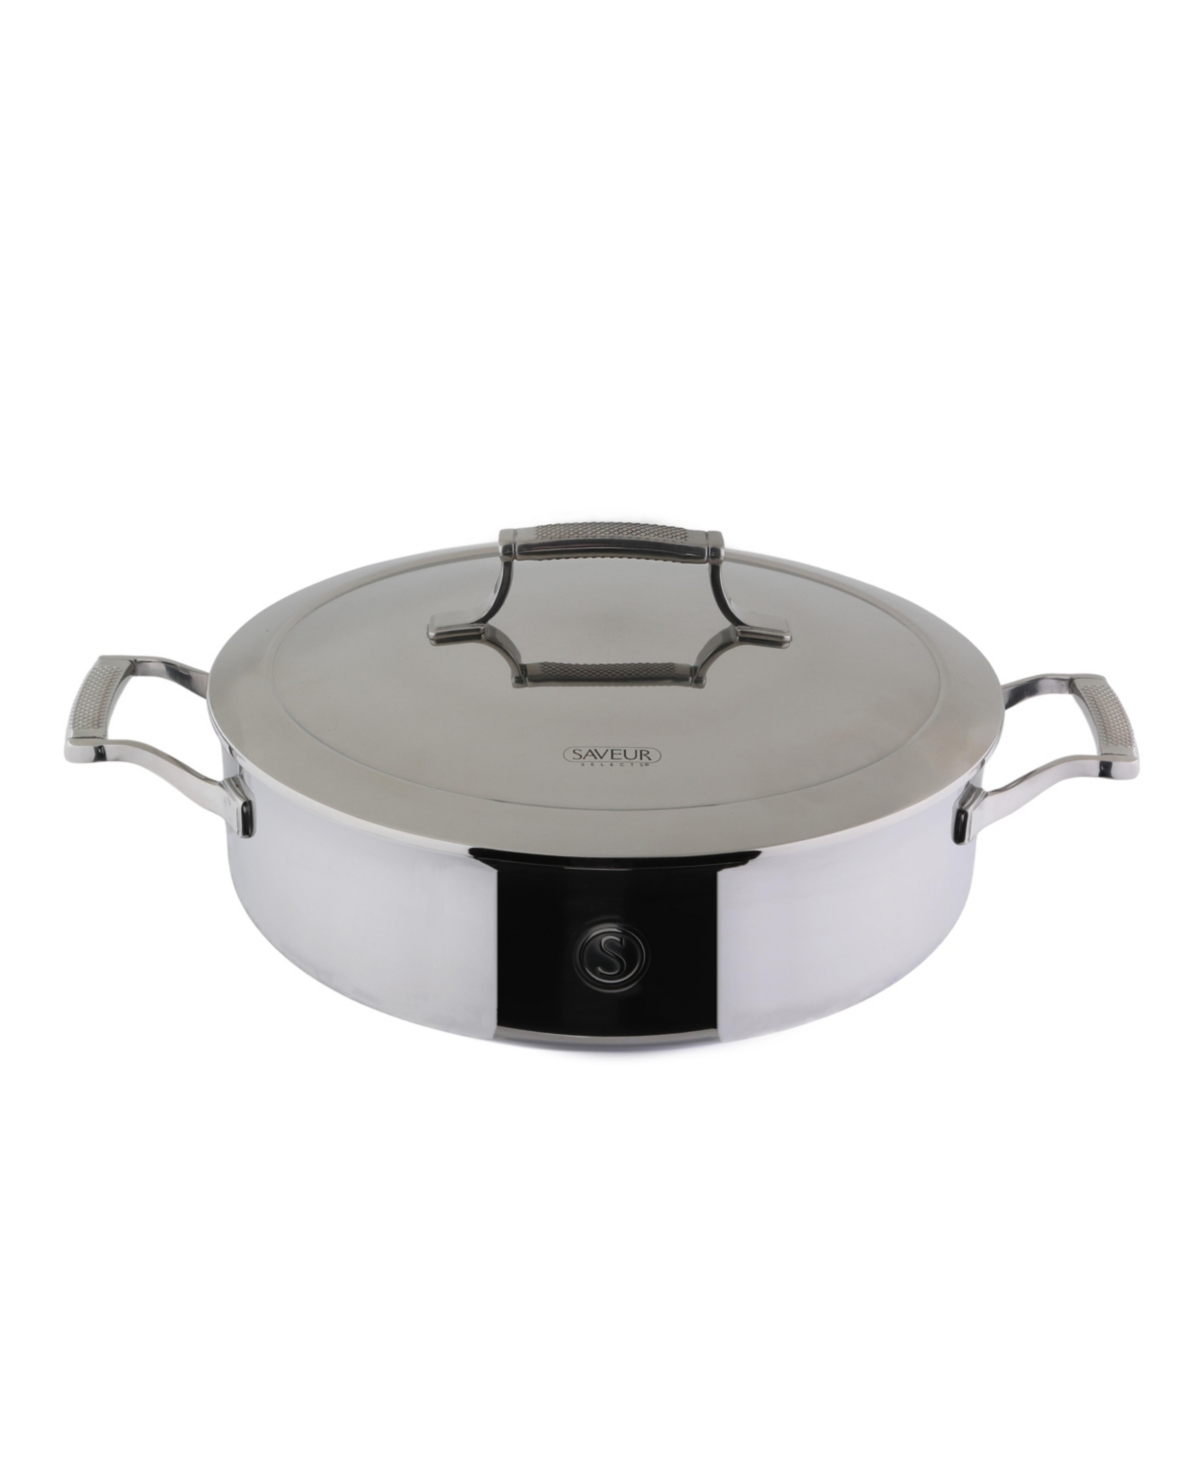 Saveur Selects Voyage Series Tri-ply Stainless Steel 5-qt. Sauteuse In Silver